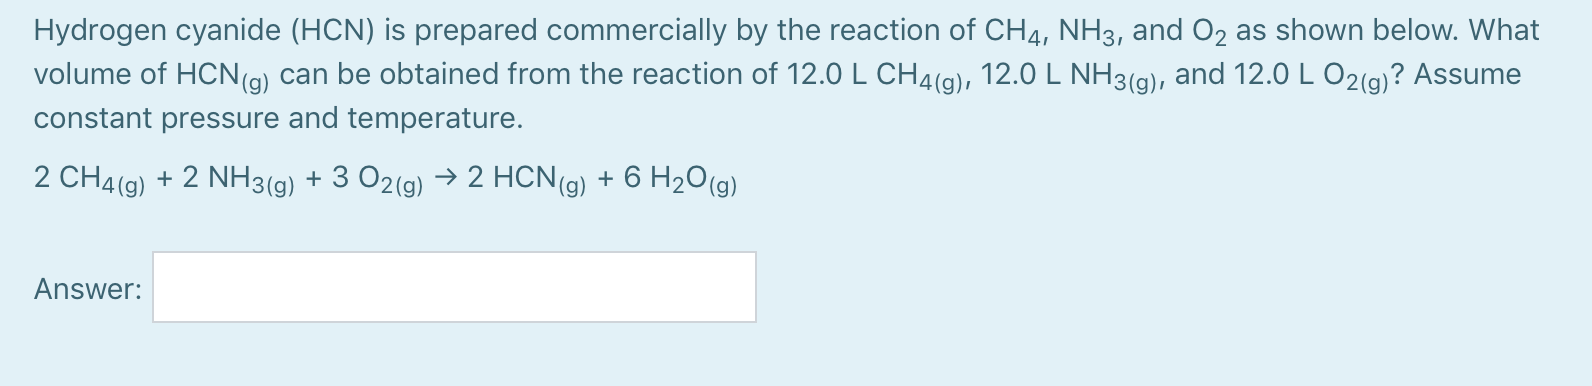 Hydrogen cyanide (HCN) is prepared commercially by the reaction of CH4, NH3, and 02 as shown below. What
volume of HCN(g) can be obtained from the reaction of 12.0 L CH4(g), 12.0 L NH3(g), and 12.0 L O2(g)? Assume
constant pressure and temperature.
2 CH4(g) + 2 NH3(g) + 3 O2(g) → 2 HCN(g) + 6 H2O(g)
Answer:
